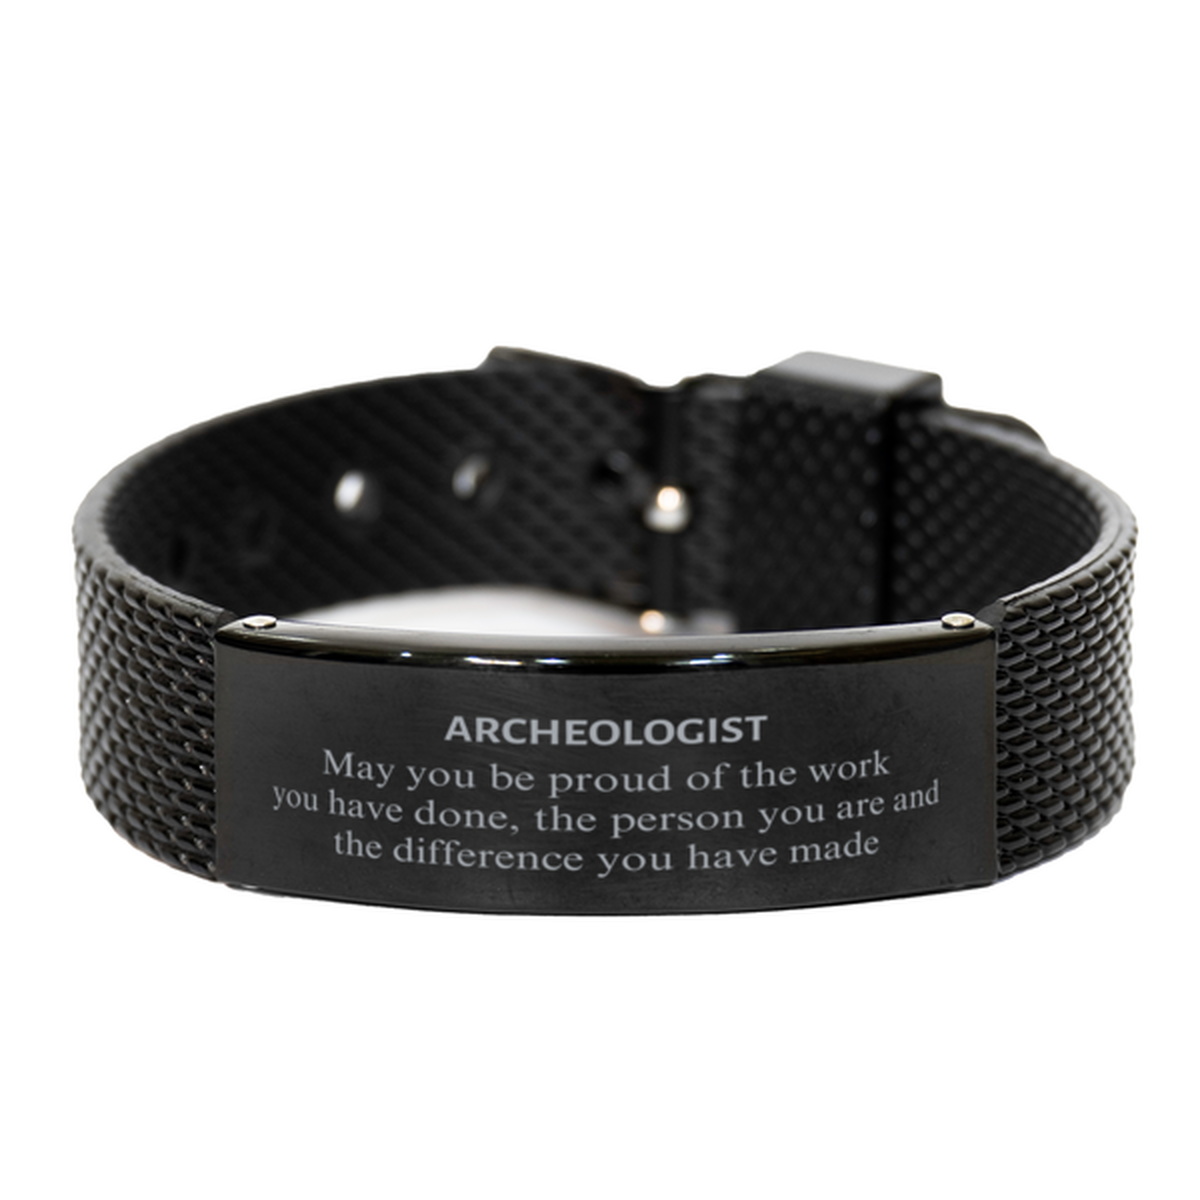 Archeologist May you be proud of the work you have done, Retirement Archeologist Black Shark Mesh Bracelet for Colleague Appreciation Gifts Amazing for Archeologist